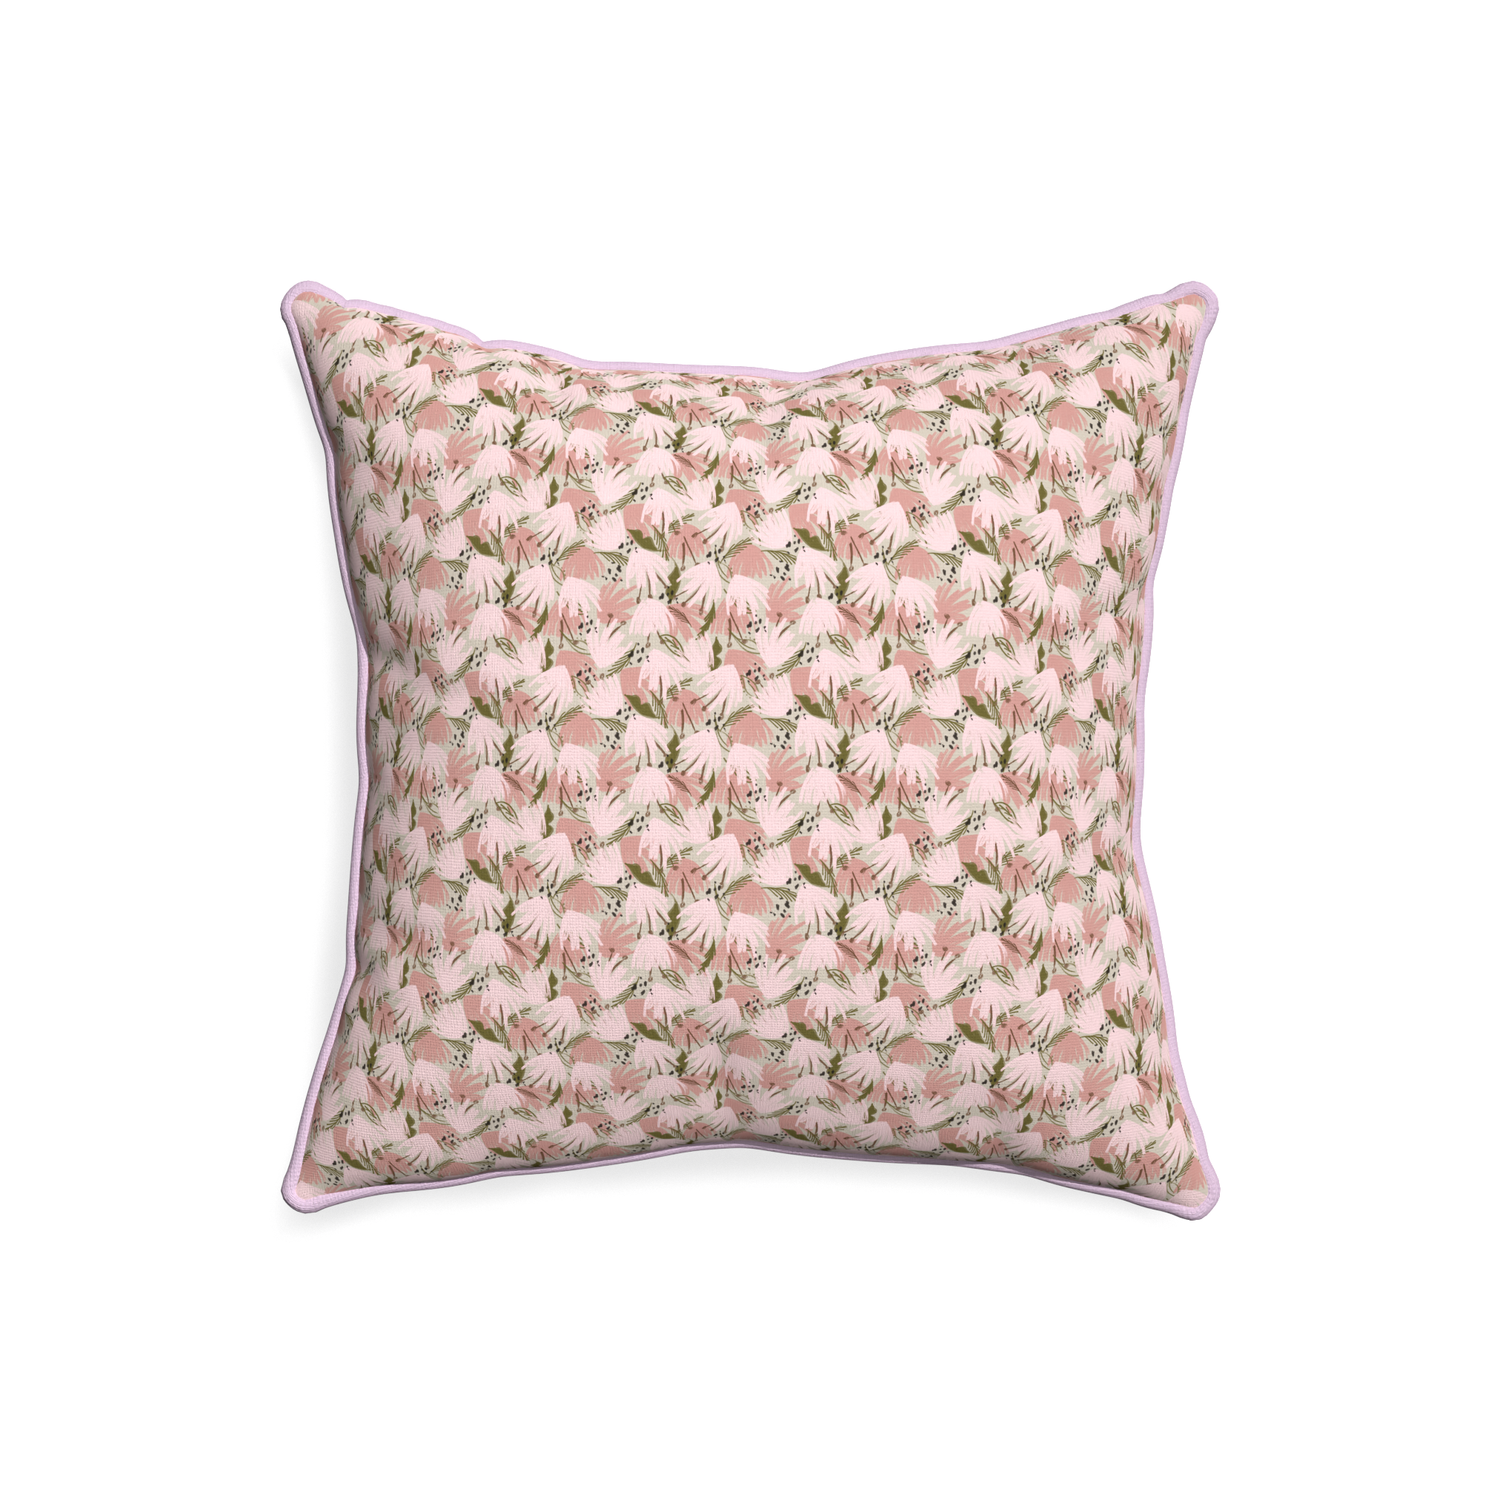 20-square eden pink custom pink floralpillow with l piping on white background